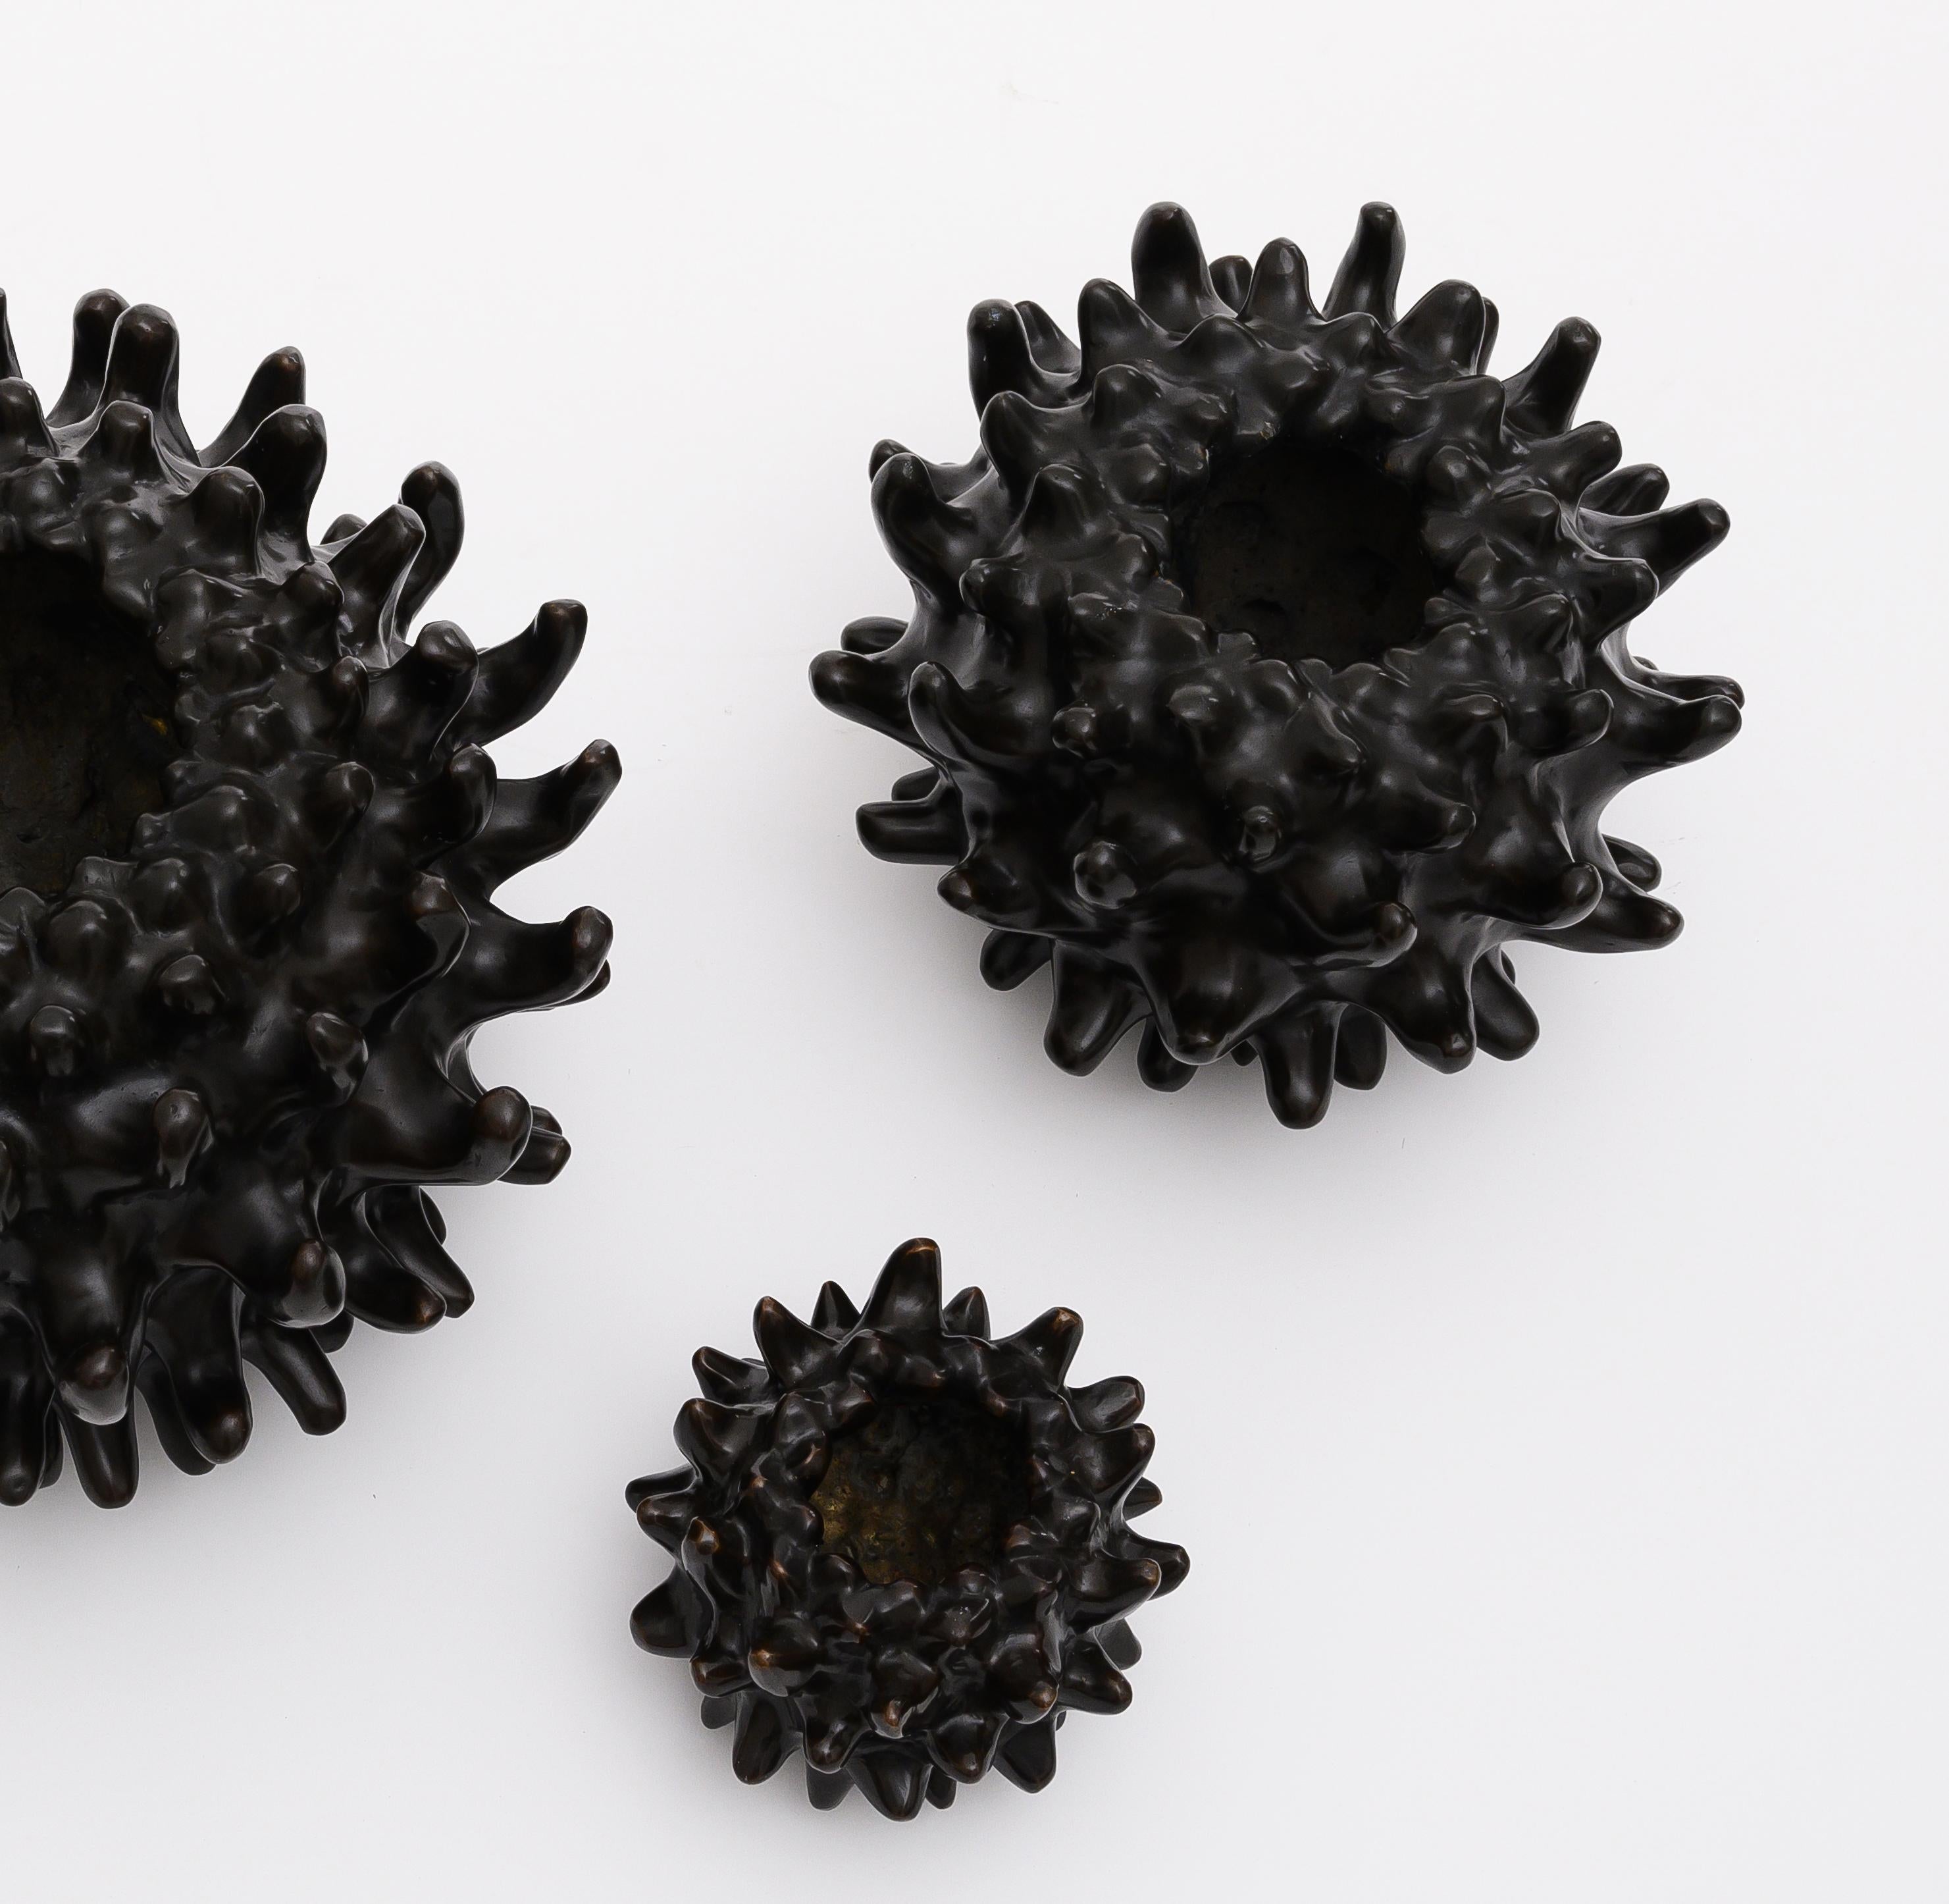 Set of 3 bronze uni vase and sculpture by Elan Atelier.

Uni vase is made in our atelier by hand utilizing the lost wax casting technique. The vase was inspired by a sea urchin and mimics the profile of the deep-sea creature.

The Uni collection